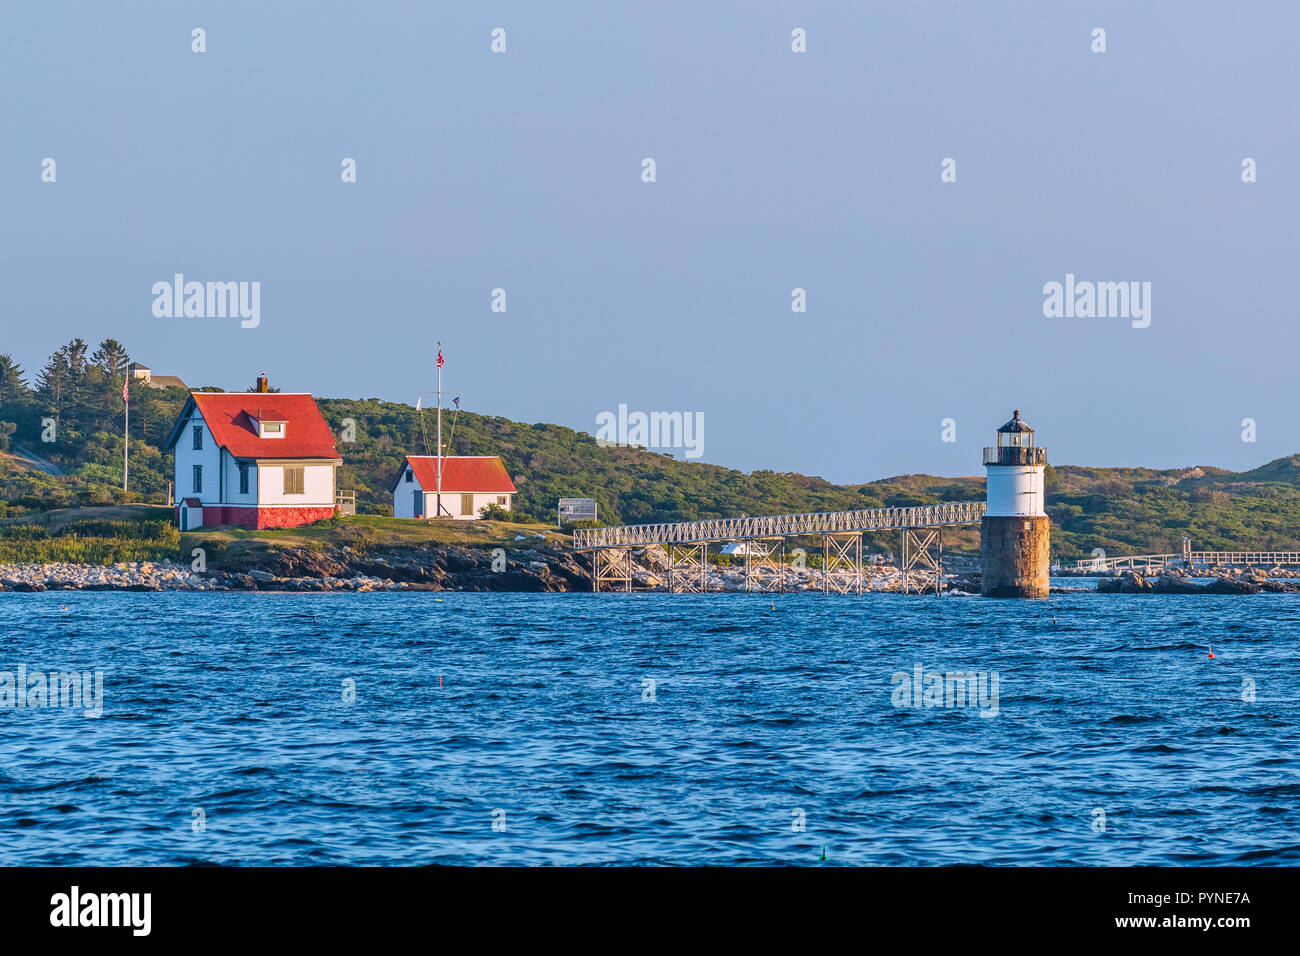 Ram Island Light High Resolution Stock Photography and Images - Alamy